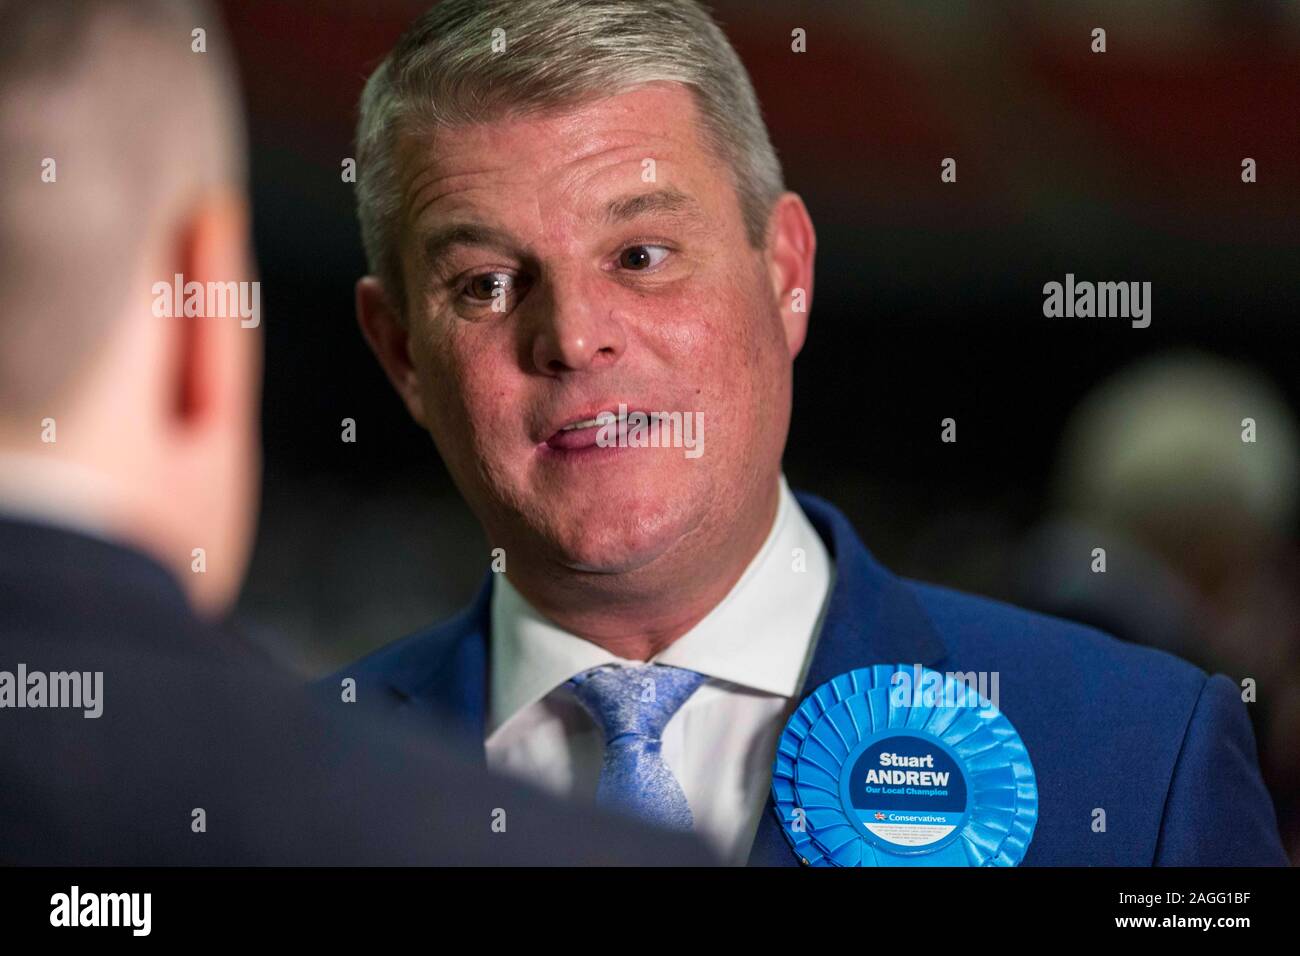 Picture by Chris Bull   13/12/19 General Election 2019 count and results at Leeds Arena. Pudsey Conservative Candidate Stuart Andrew. www.chrisbullphotographer.com Stock Photo